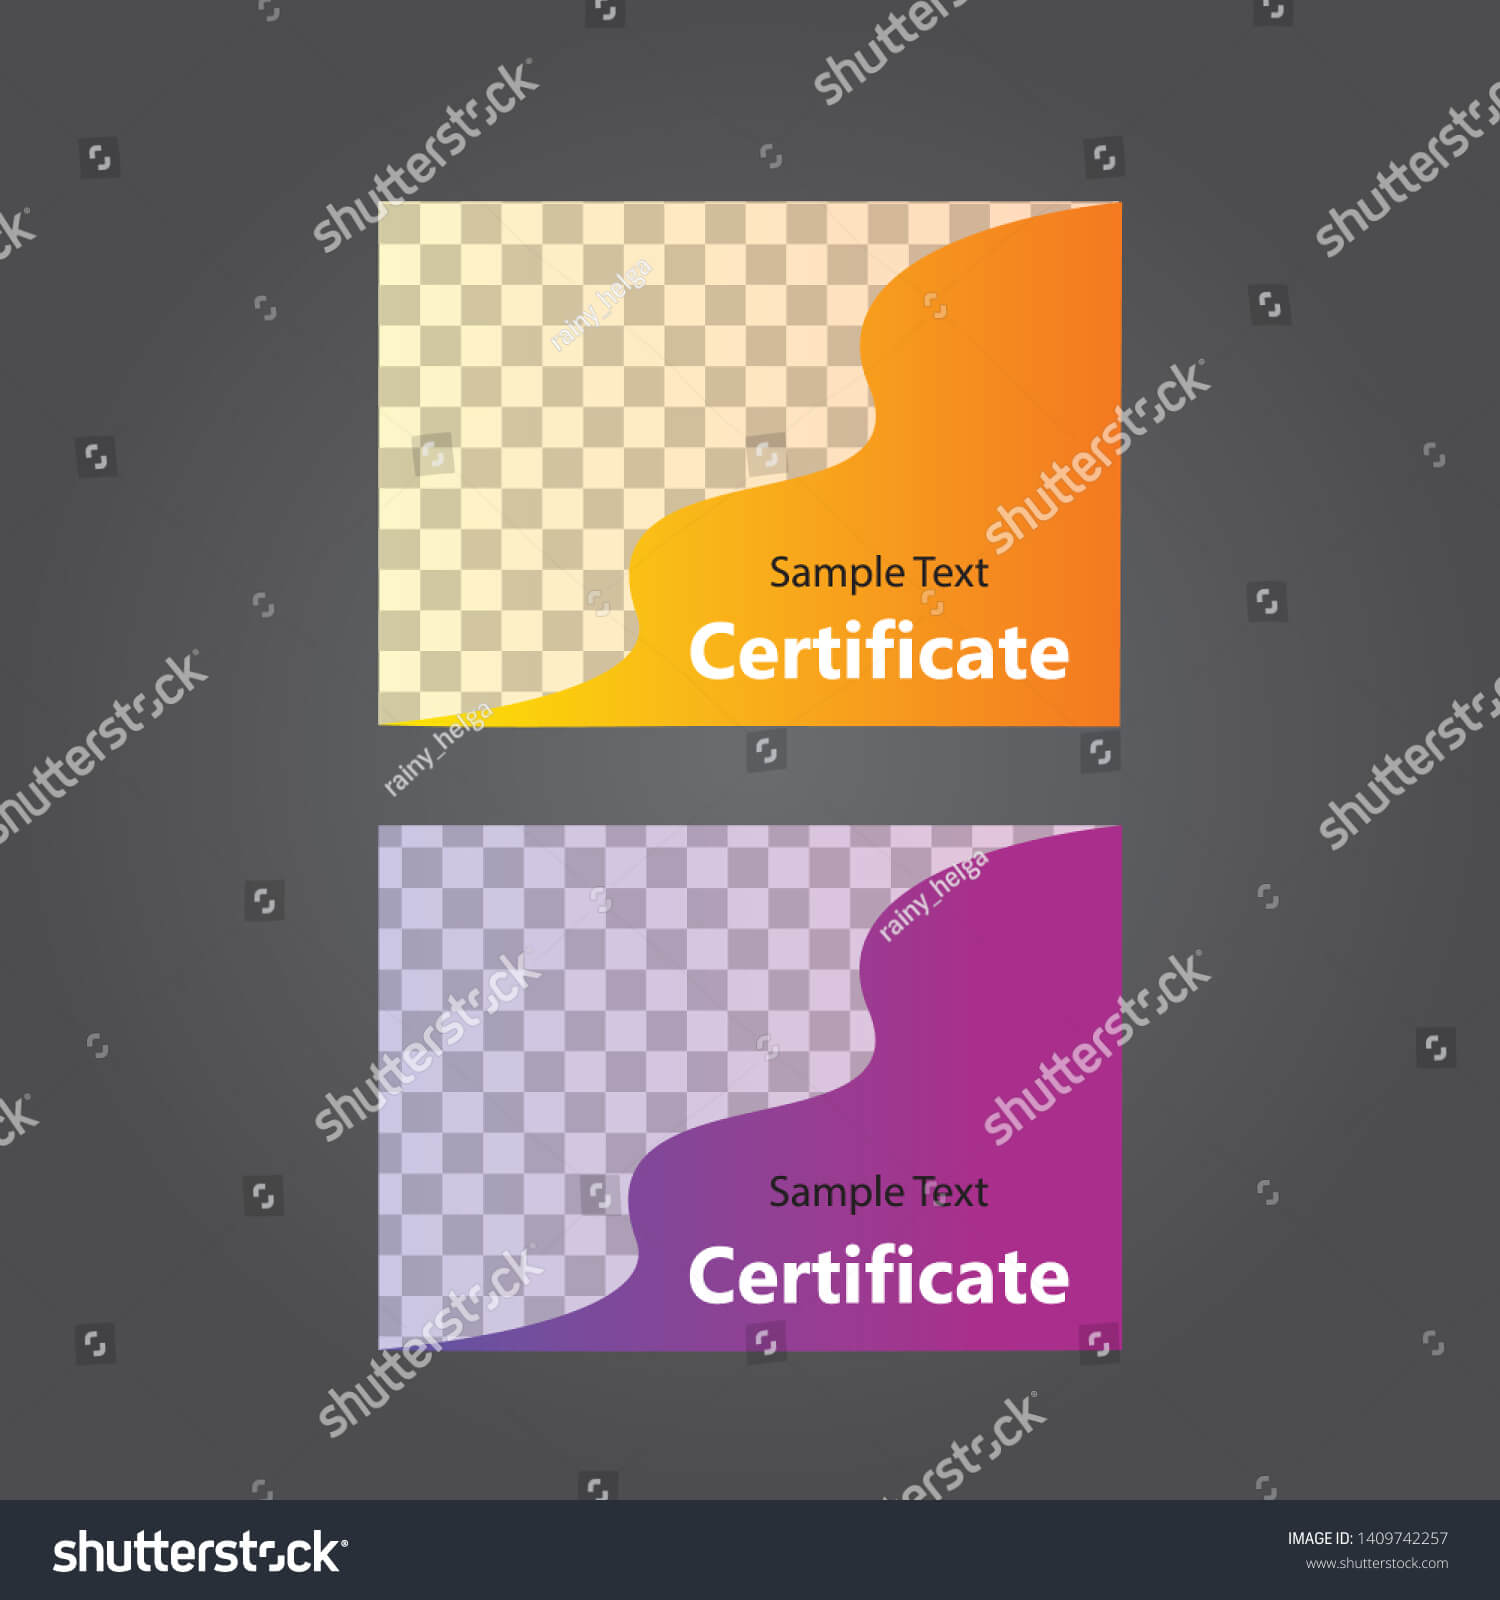 Set Two Gradient Certificate Templates Place | Royalty Free With Update Certificates That Use Certificate Templates